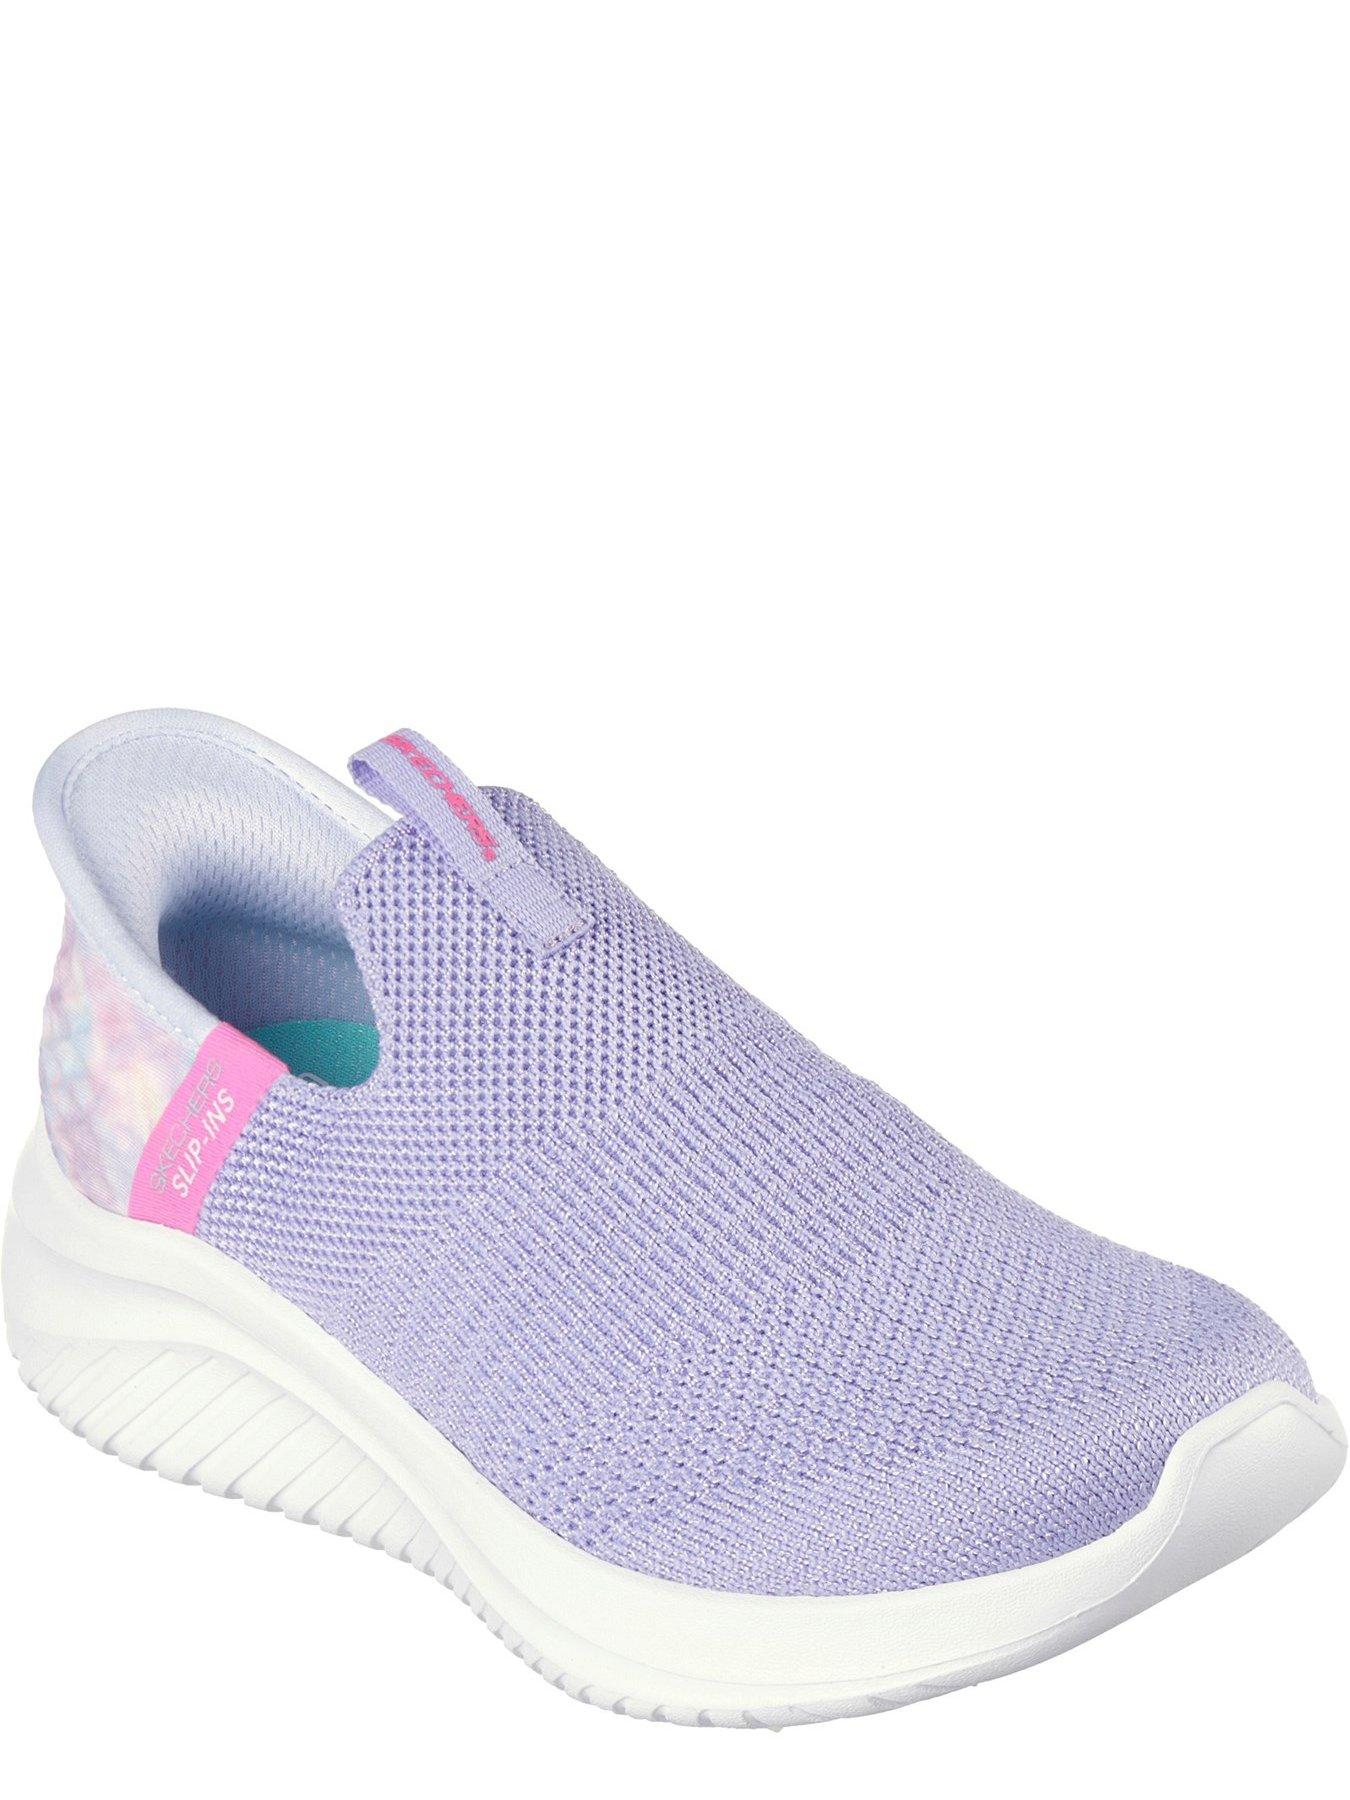 Skechers Friends and Family - 30% Off F